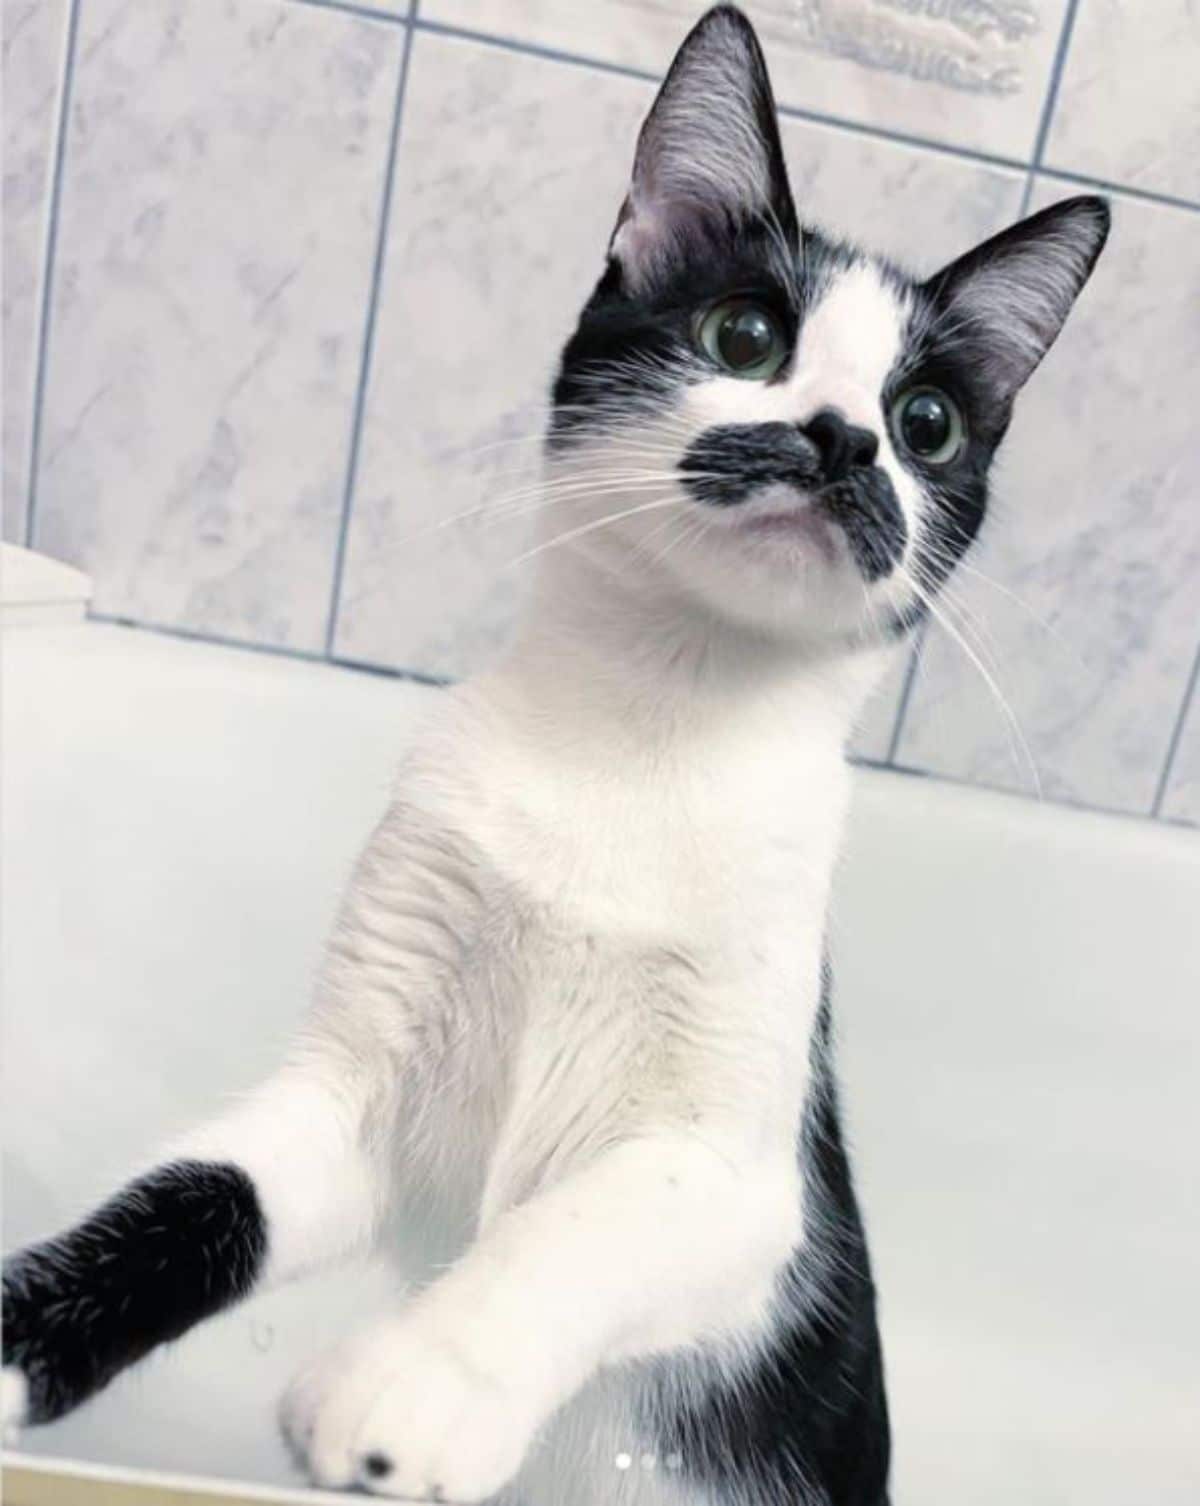 black and white kitten with a black moustache standing on the hind legs in a white bathtub